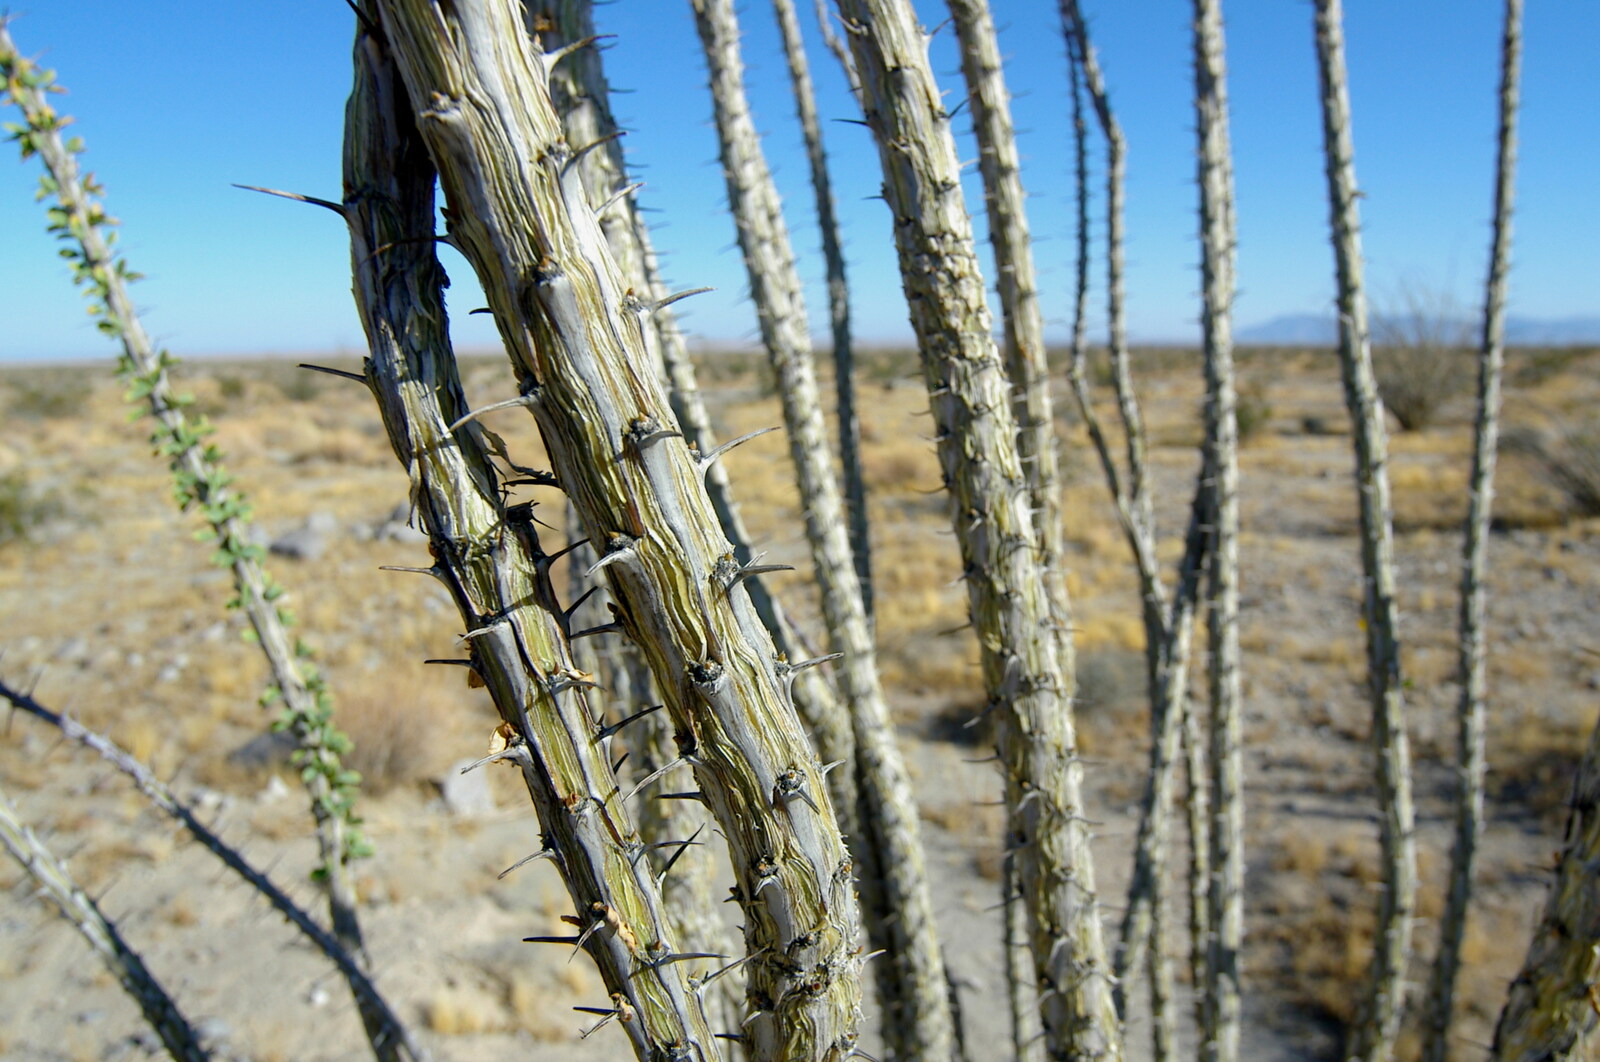 Close-up of prickly spines from California Desert 2: The Salton Sea and Anza-Borrego to Julian, California, US - 24th September 2005